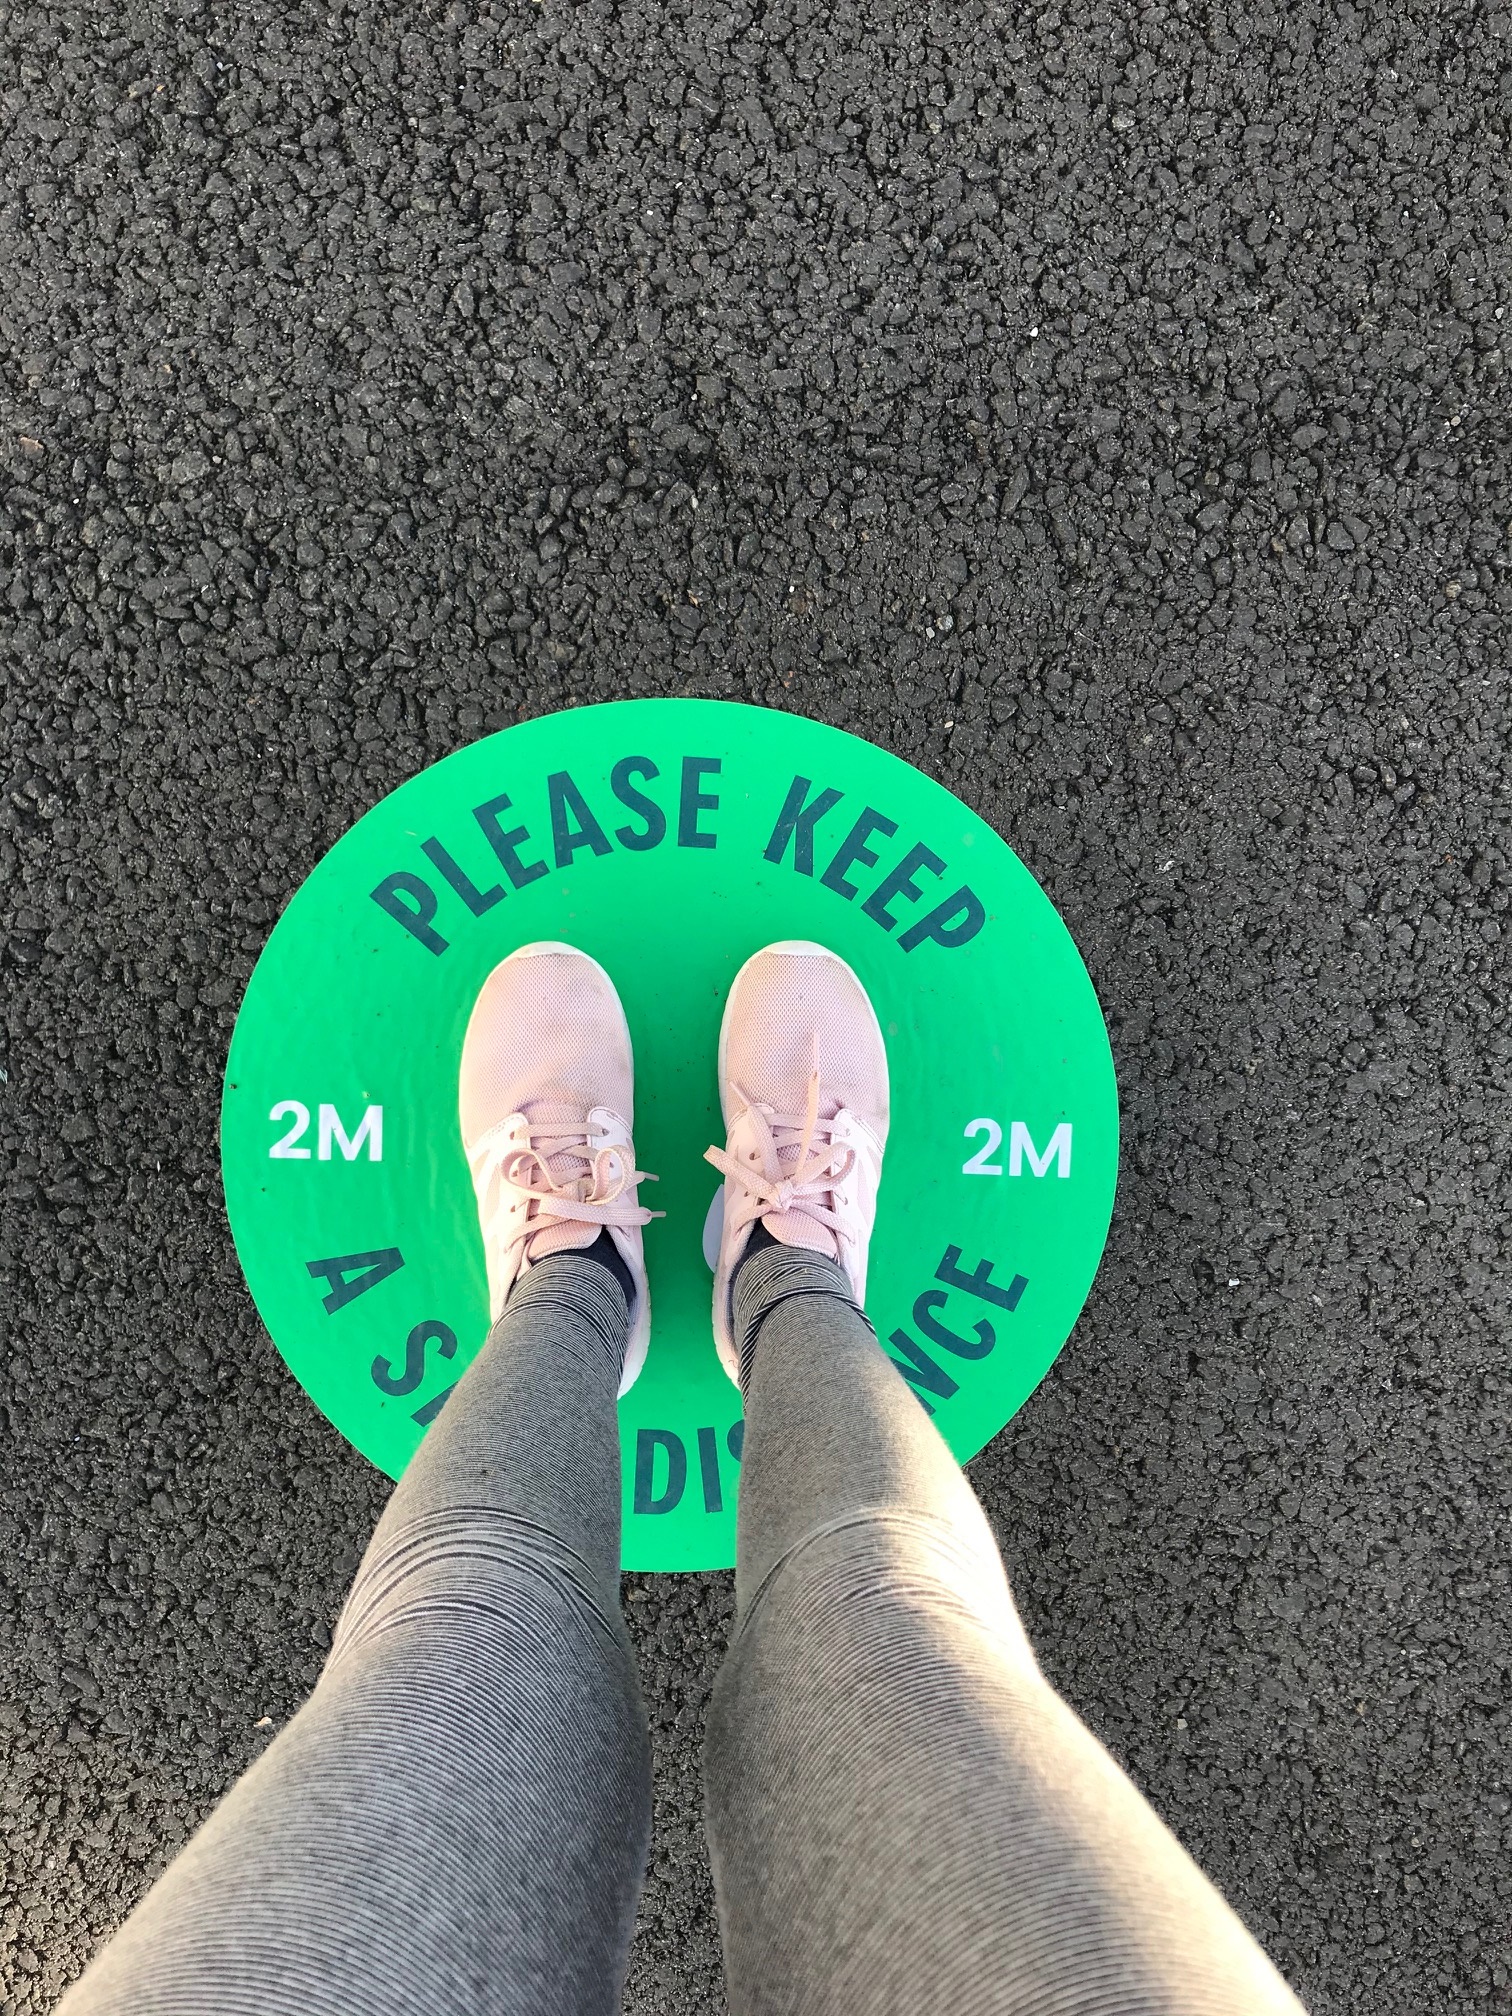 Photograph of someone's feet, standing on a green circle which says "Please Keep a Safe Distance"